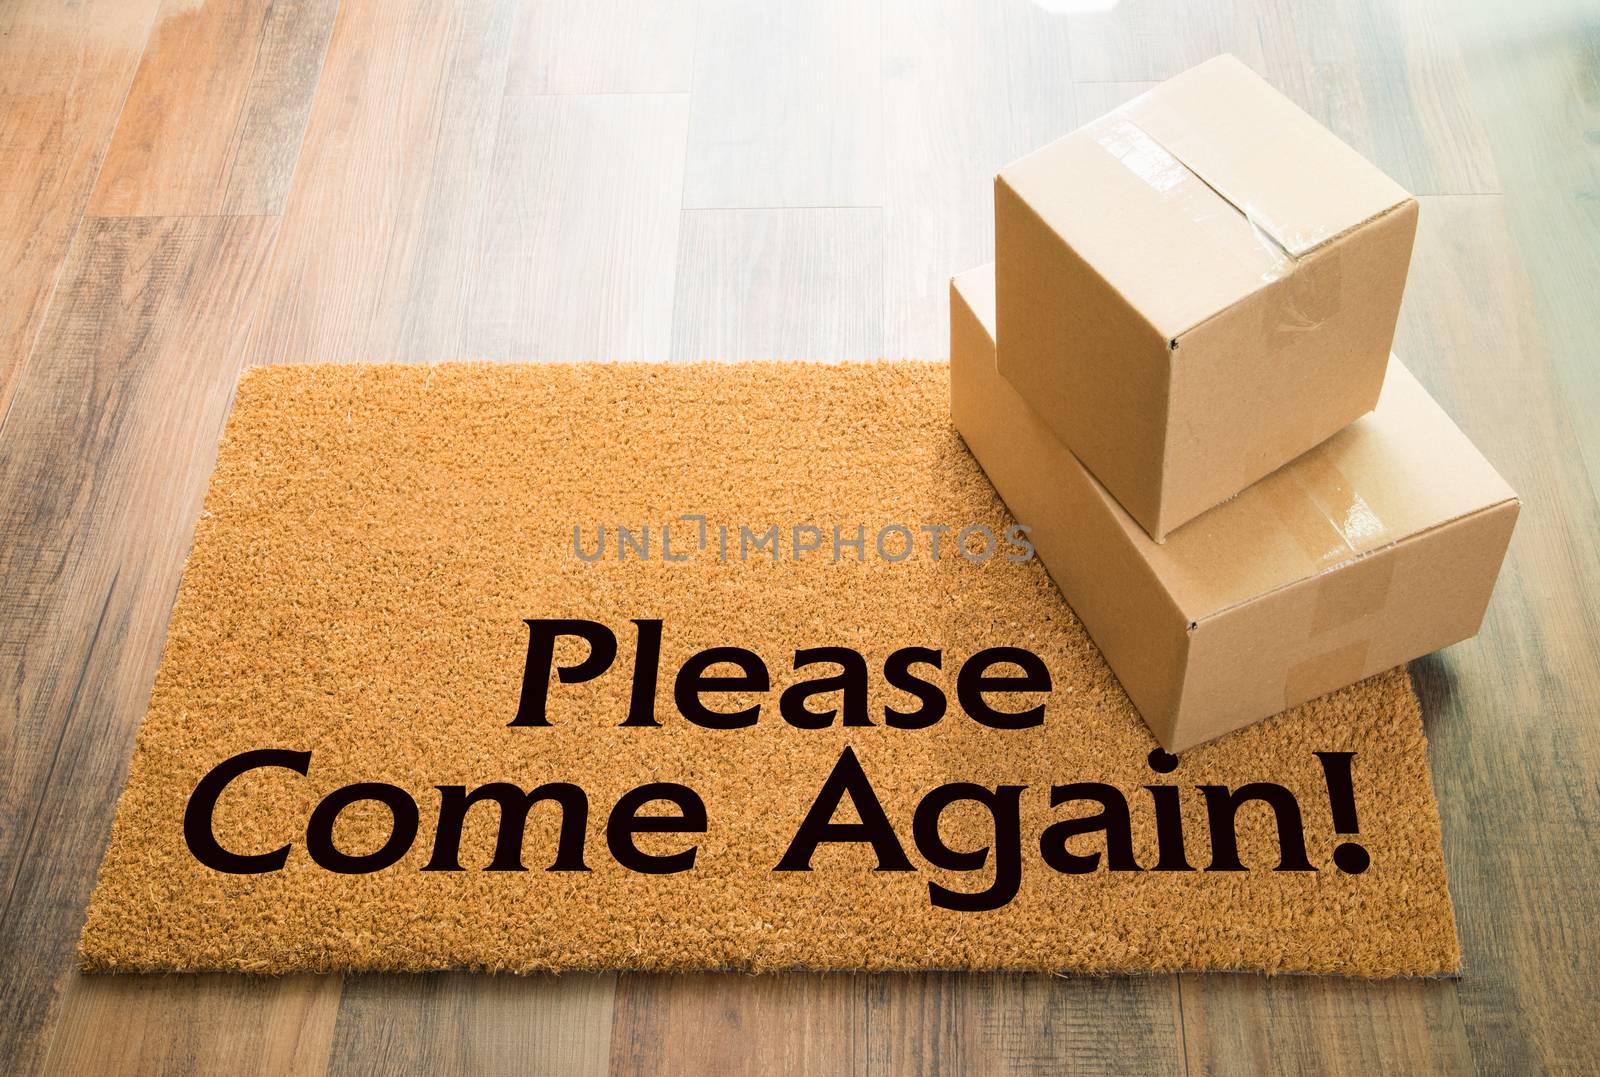 Please Come Again Welcome Mat On Wood Floor With Shipment of Box by Feverpitched